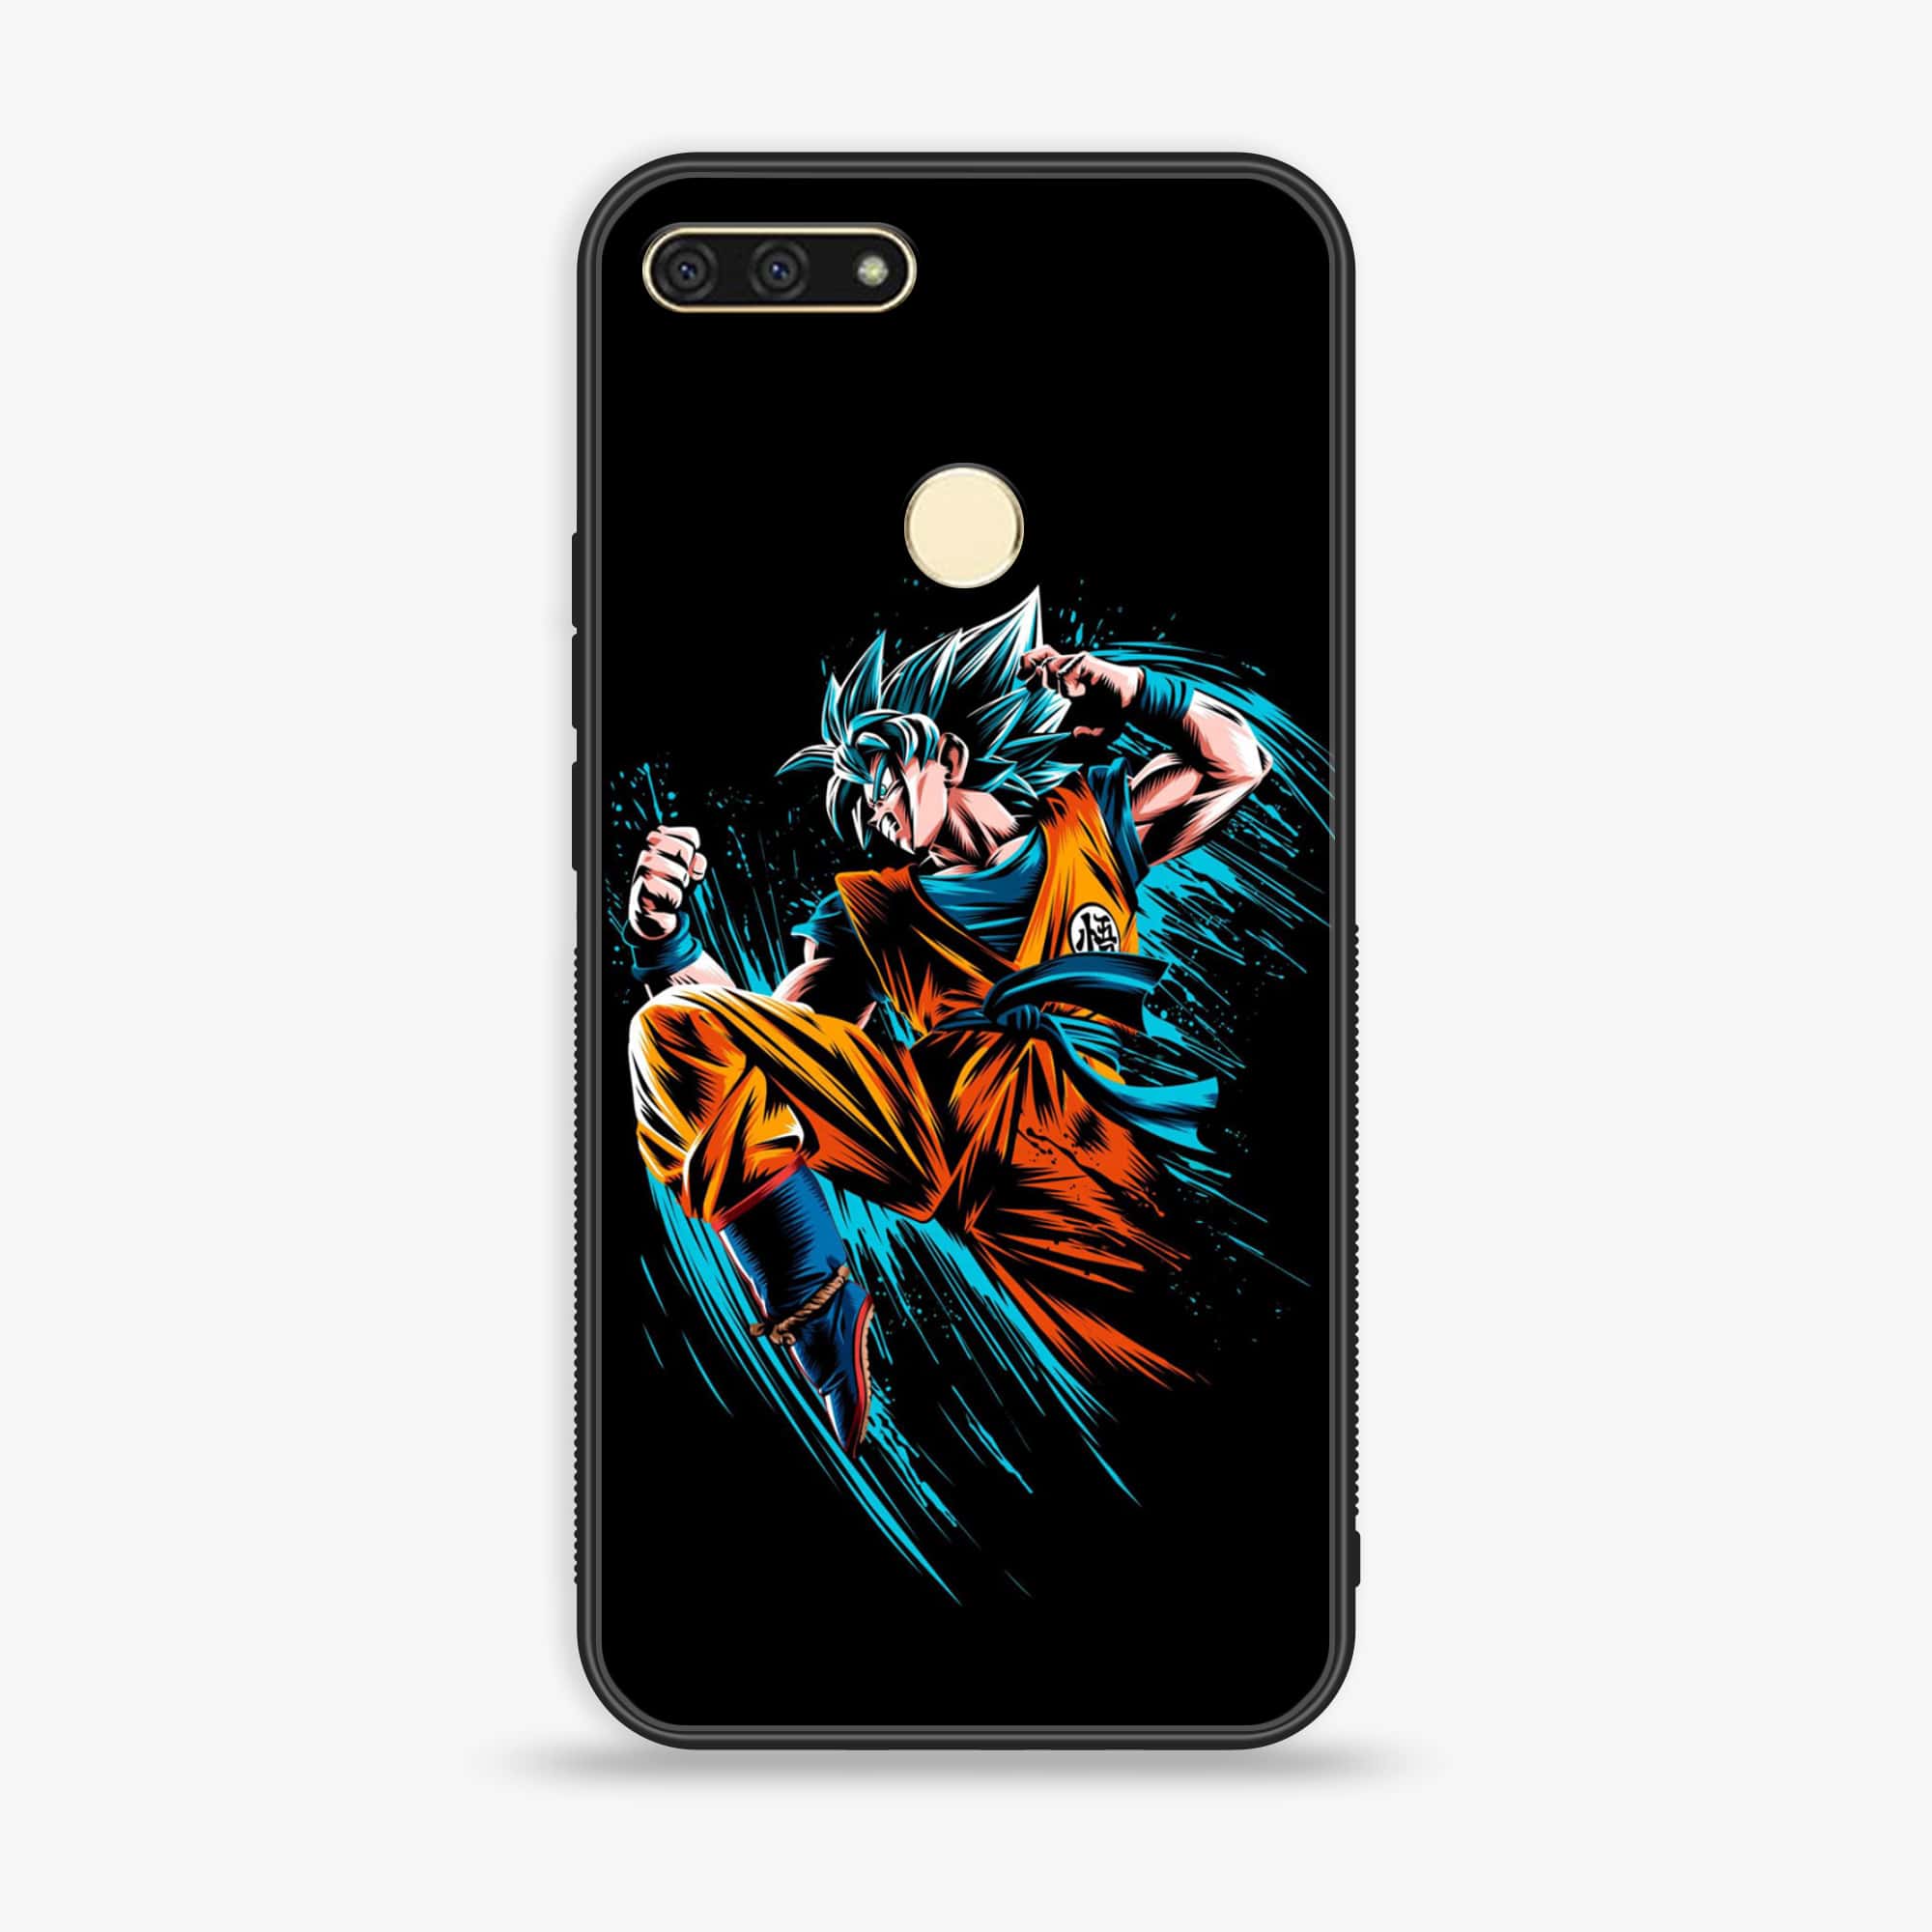 Huawei Y6 2018/Honor Play 7A - Anime 2.0 Series - Premium Printed Glass soft Bumper shock Proof Case